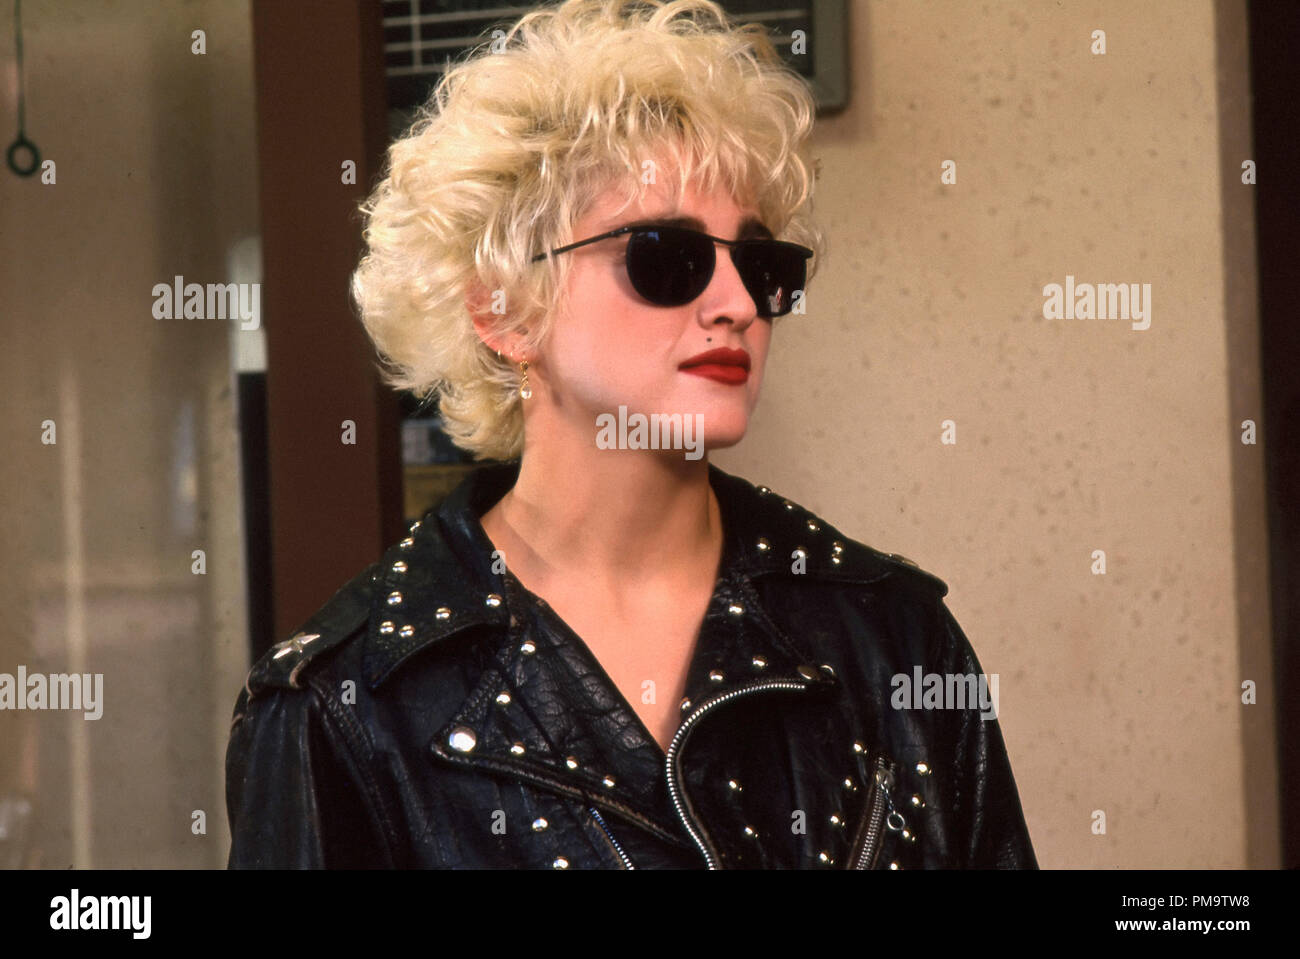 Studio Publicity Still from 'Who's That Girl' Madonna © 1987 Warner  All Rights Reserved   File Reference # 31697008THA  For Editorial Use Only Stock Photo